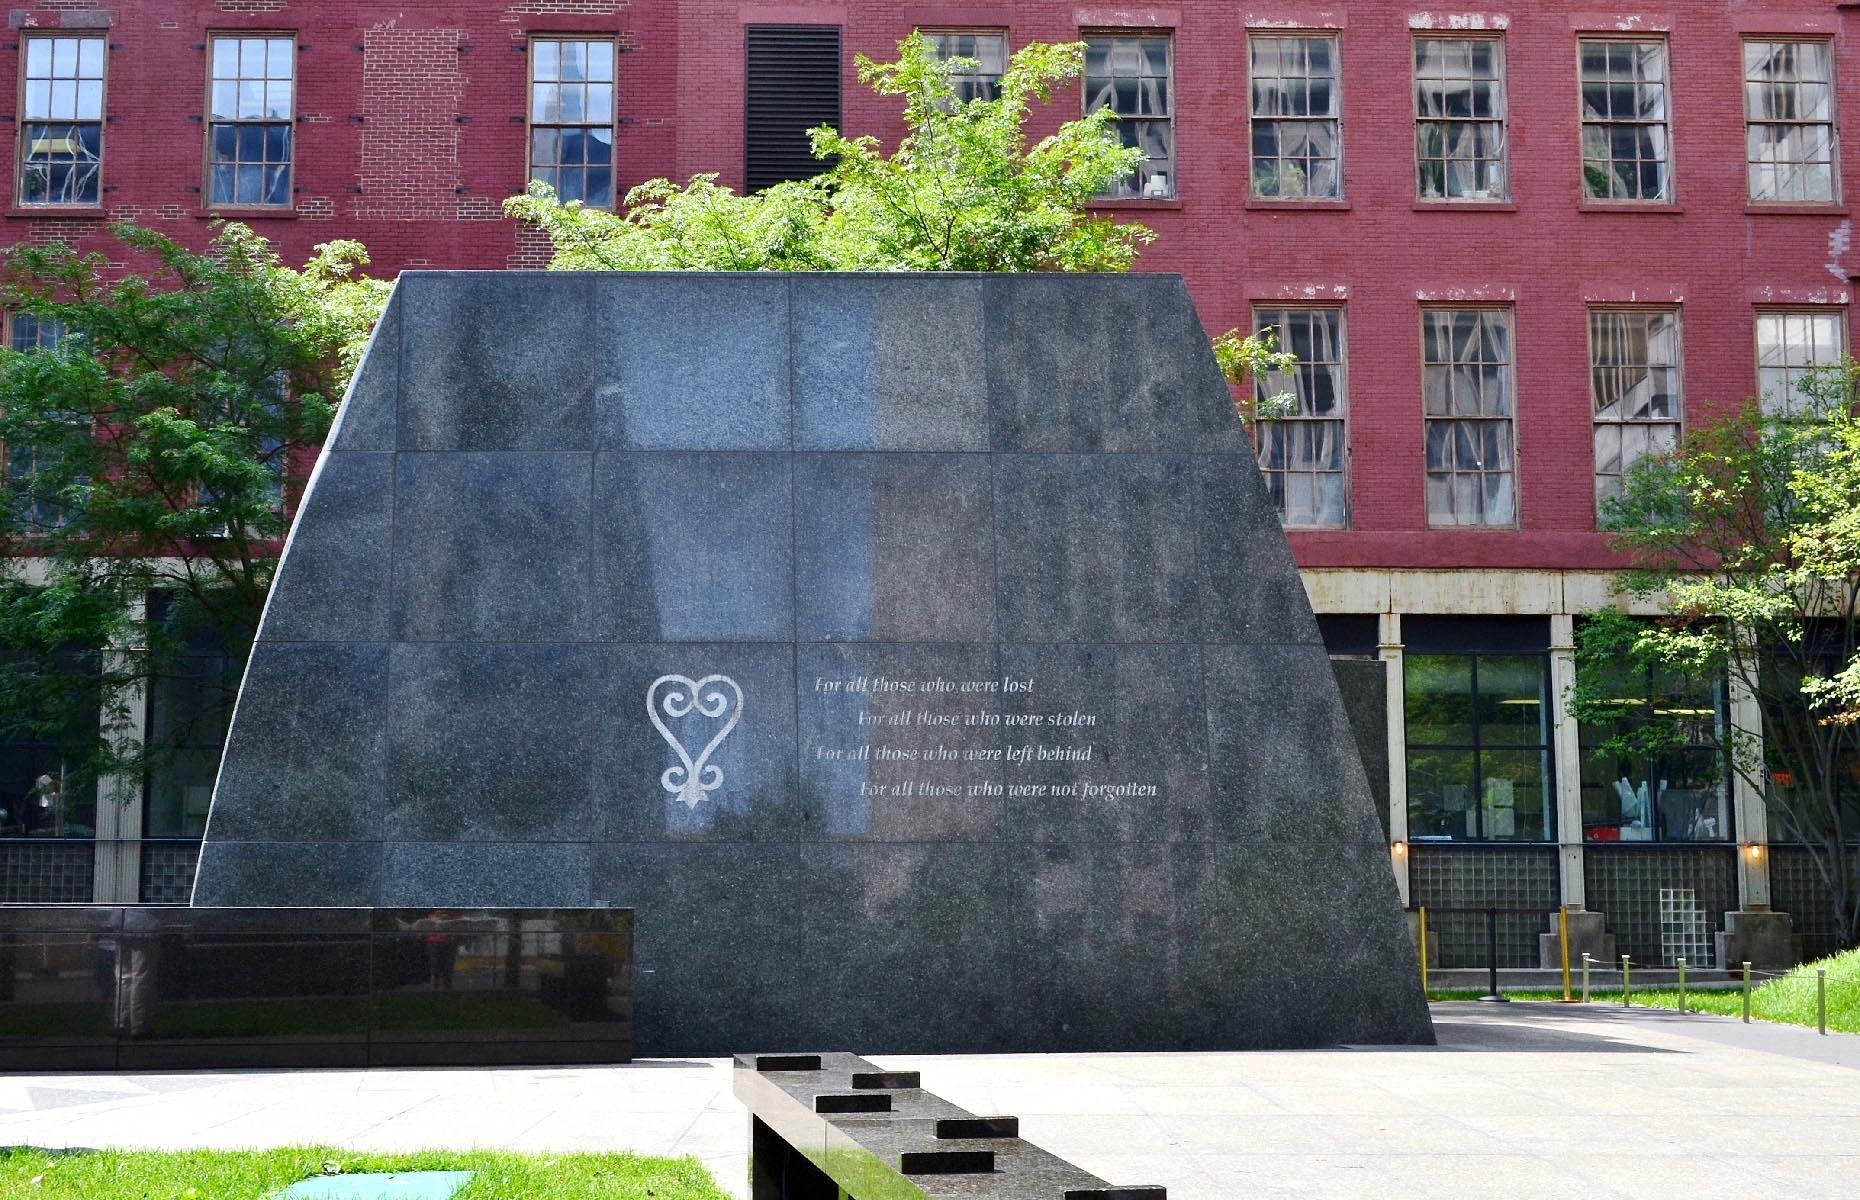 <p>A poignant site in Lower Manhattan, the African Burial Ground National Monument protects an excavated African burial ground thought to date from the 1630s to 1795. The burial ground was discovered in the late 20th century during survey work prior to construction of an office tower here – the remains of some 15,000 Africans (both free and enslaved) who lived in New York were found. Today their lives are honored with a memorial and their history is chronicled in an interpretive center and research library.</p>